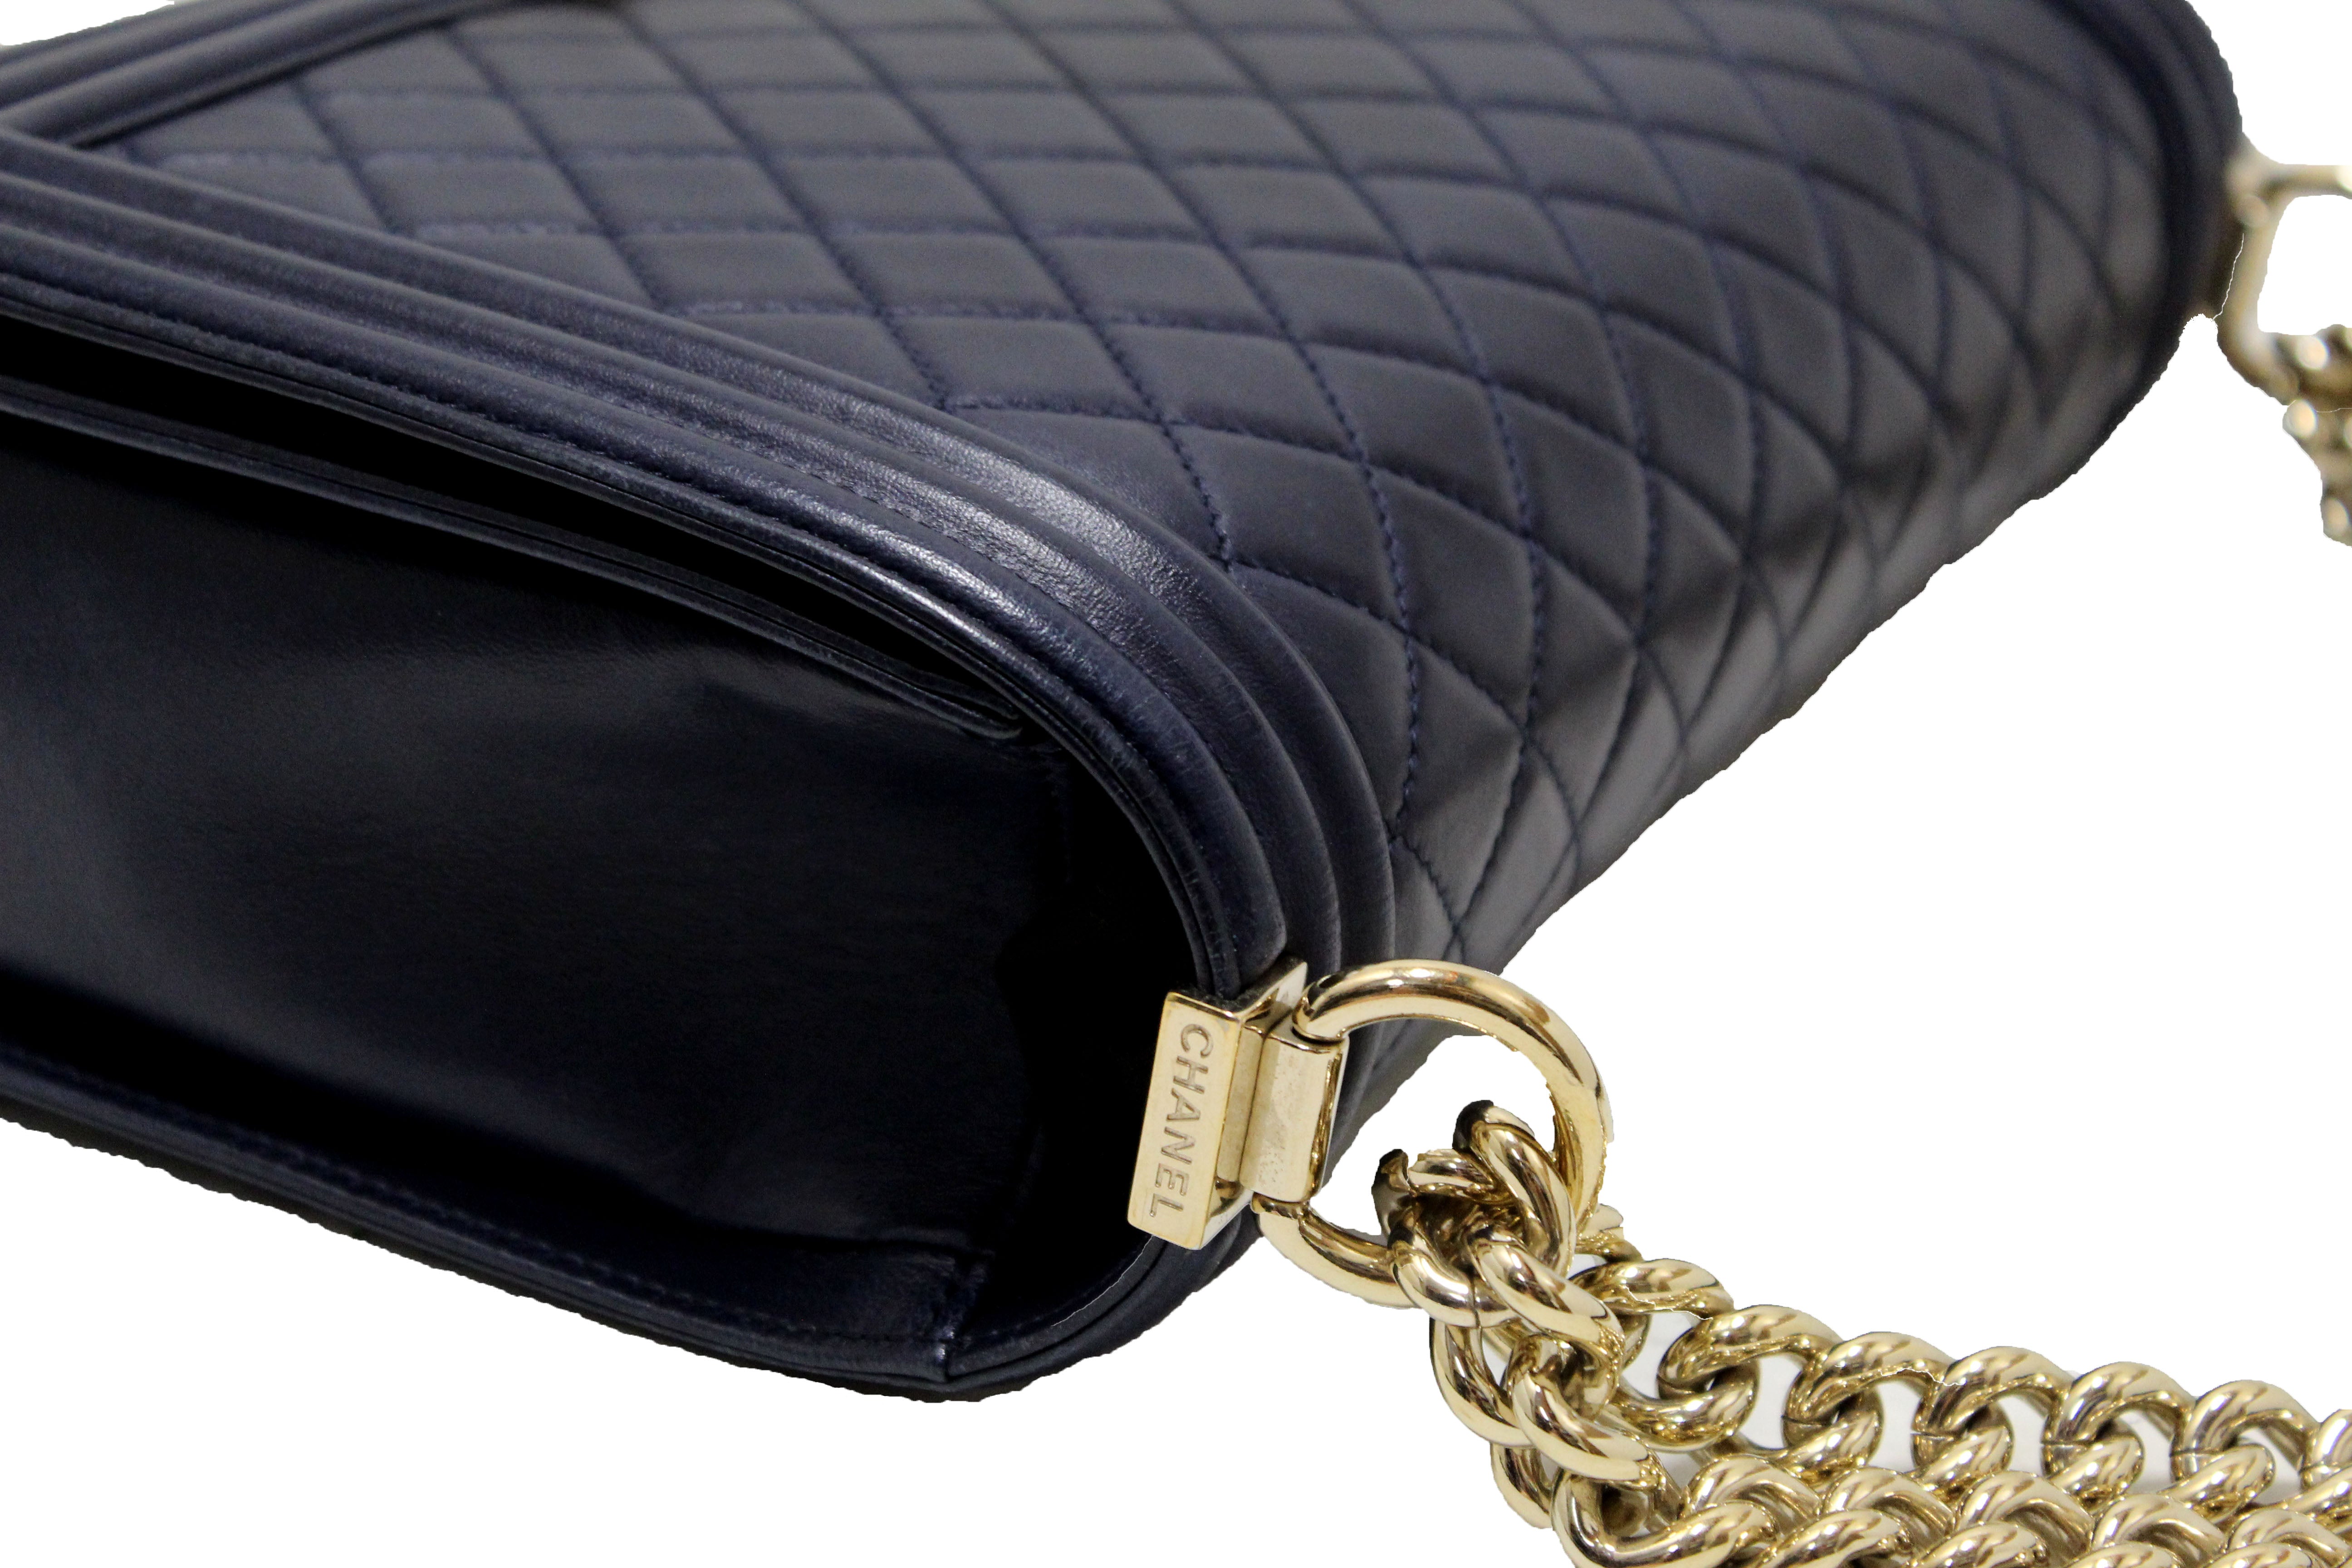 Authentic Chanel Blue Quilted Lambskin Leather New Medium Boy Shoulder Bag